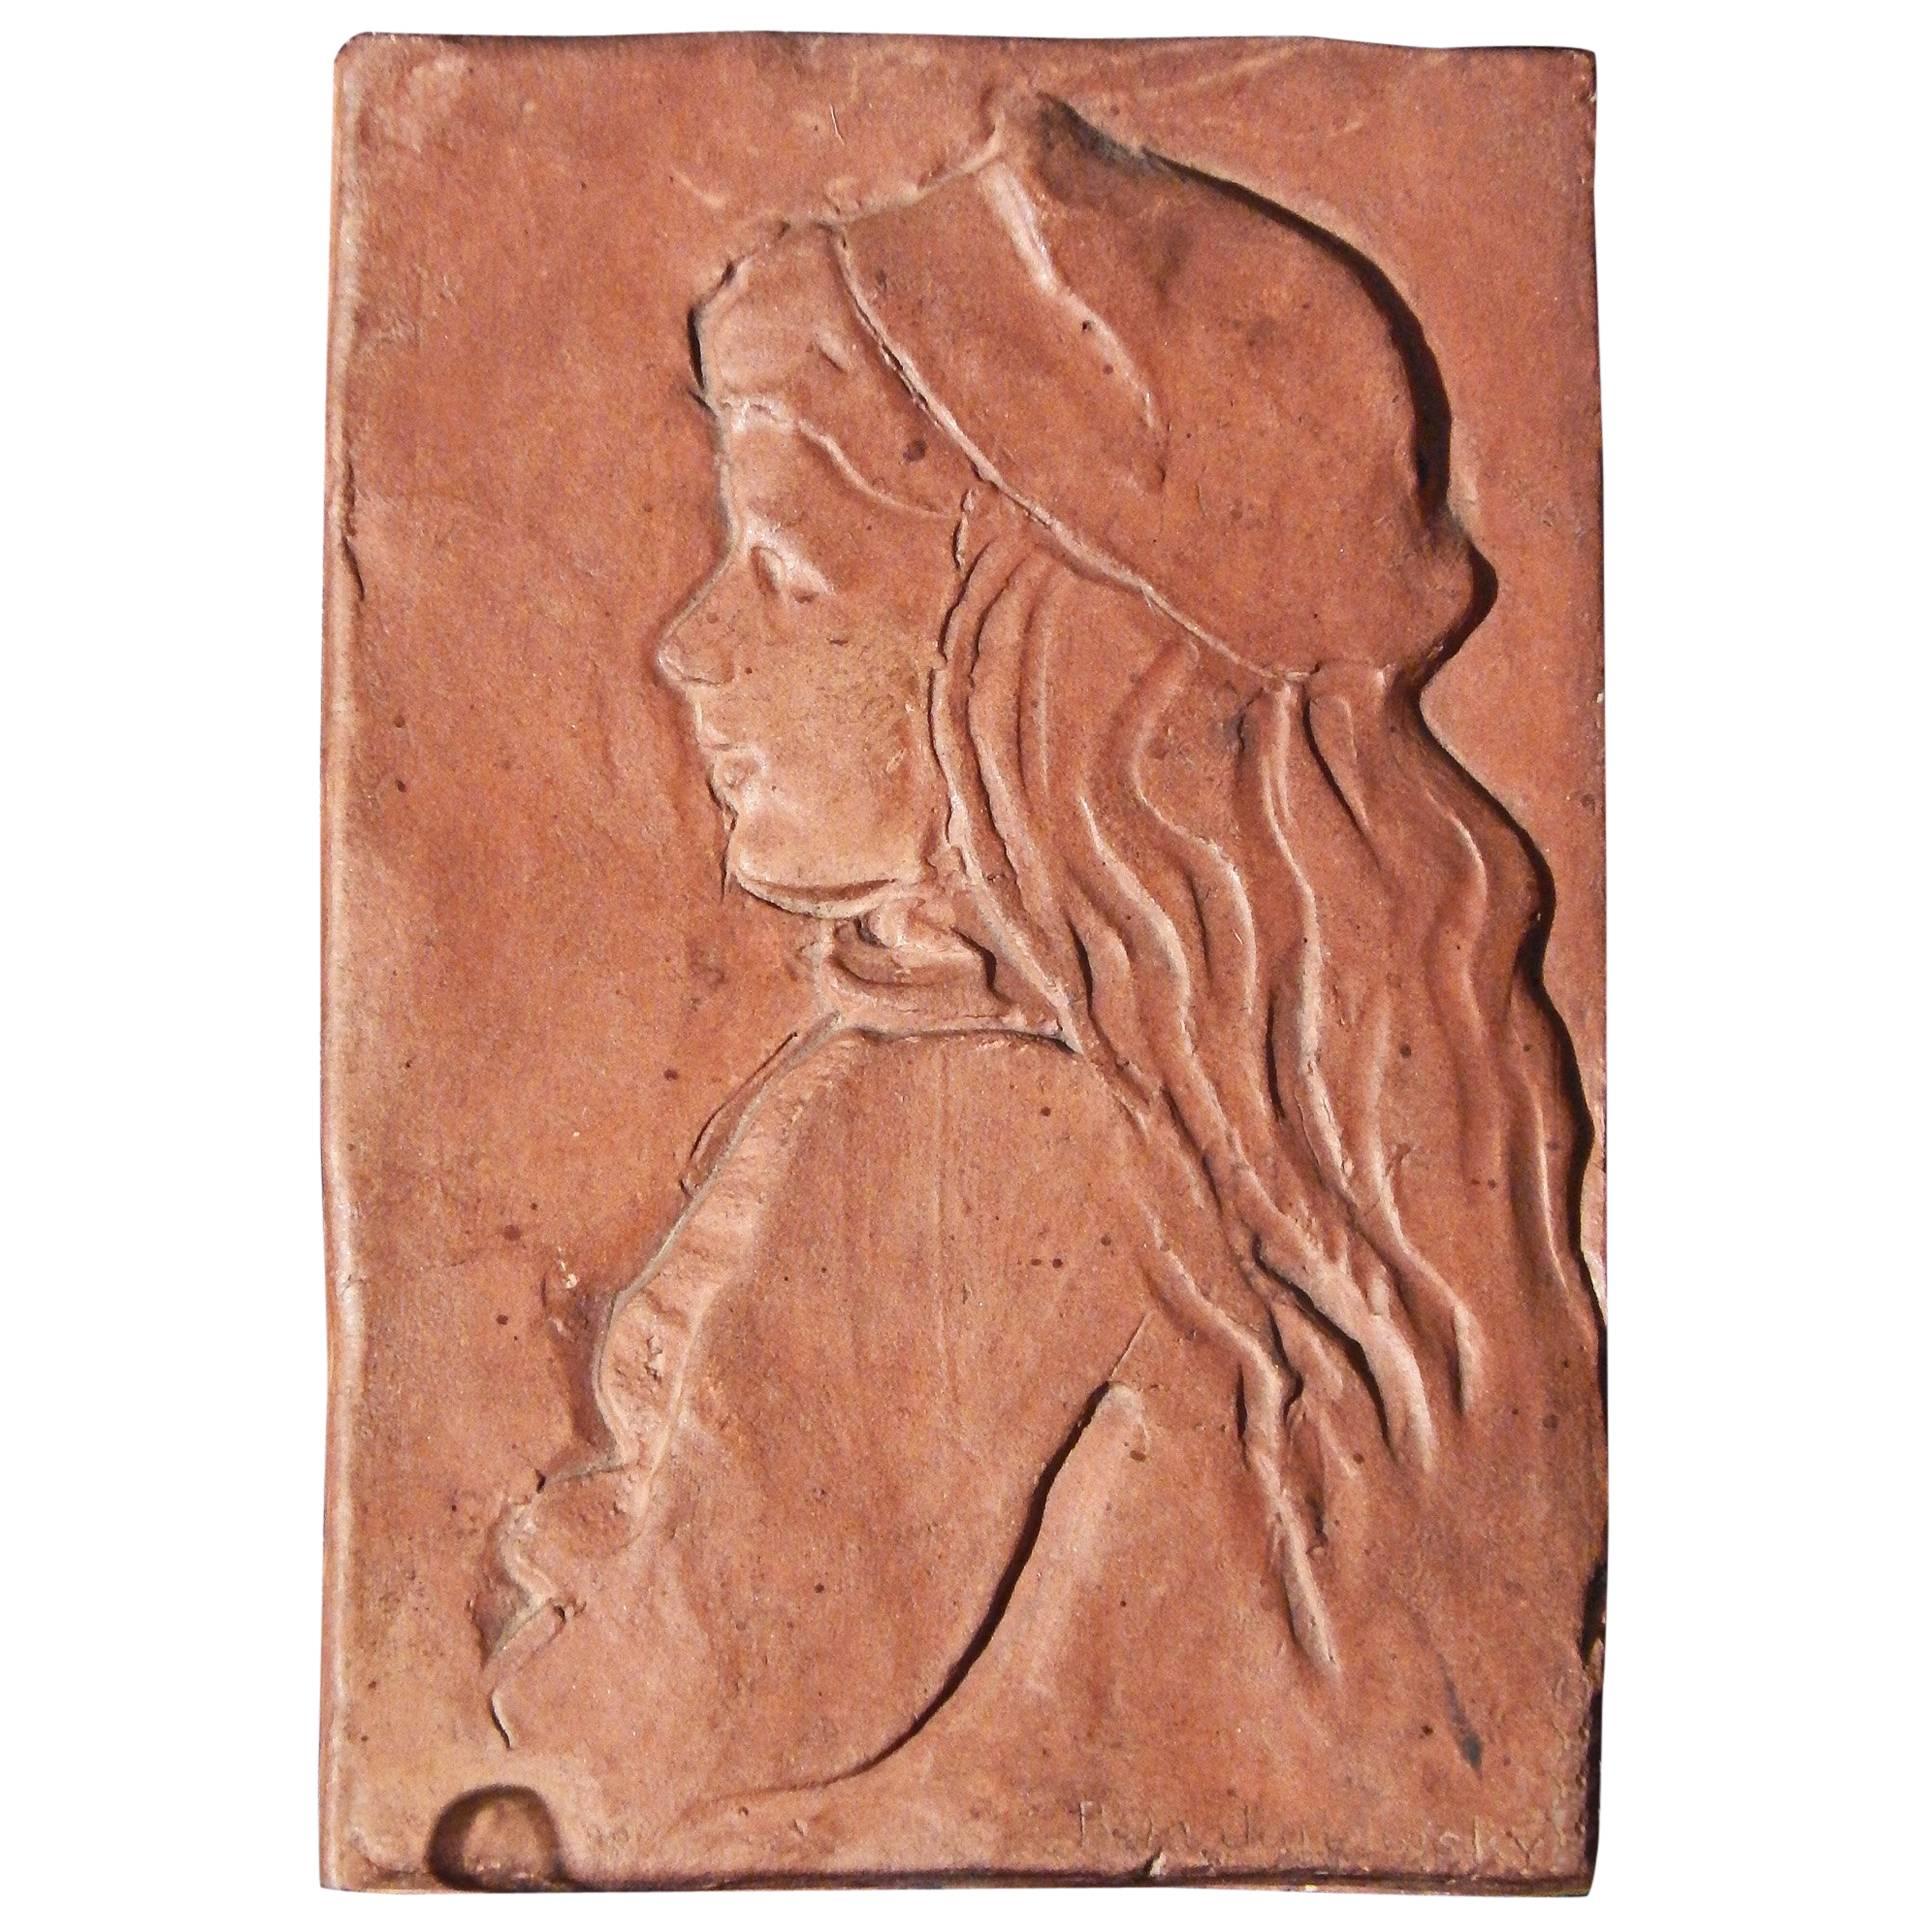 "Girl with Beret, " Lovely, Carved 1930s Sculptural Plaque by Bela Janowsky